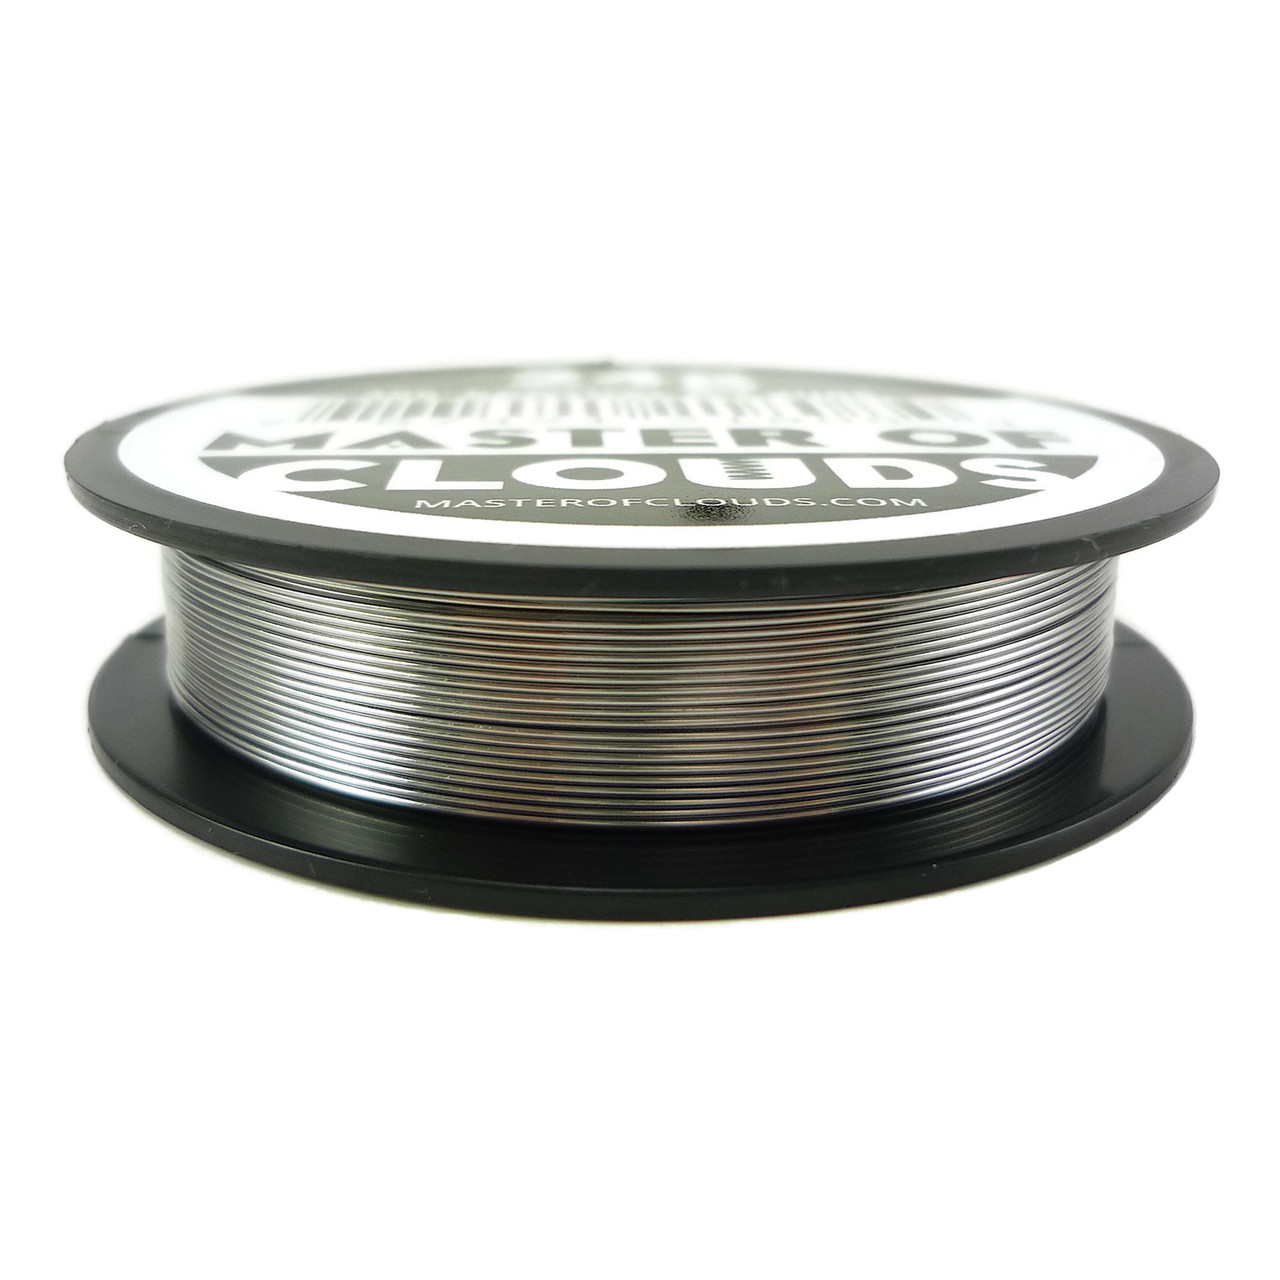 RBA Depot Stainless Steel SS 316L Competition Resistance Wire 24 Gauge AWG 100ft 